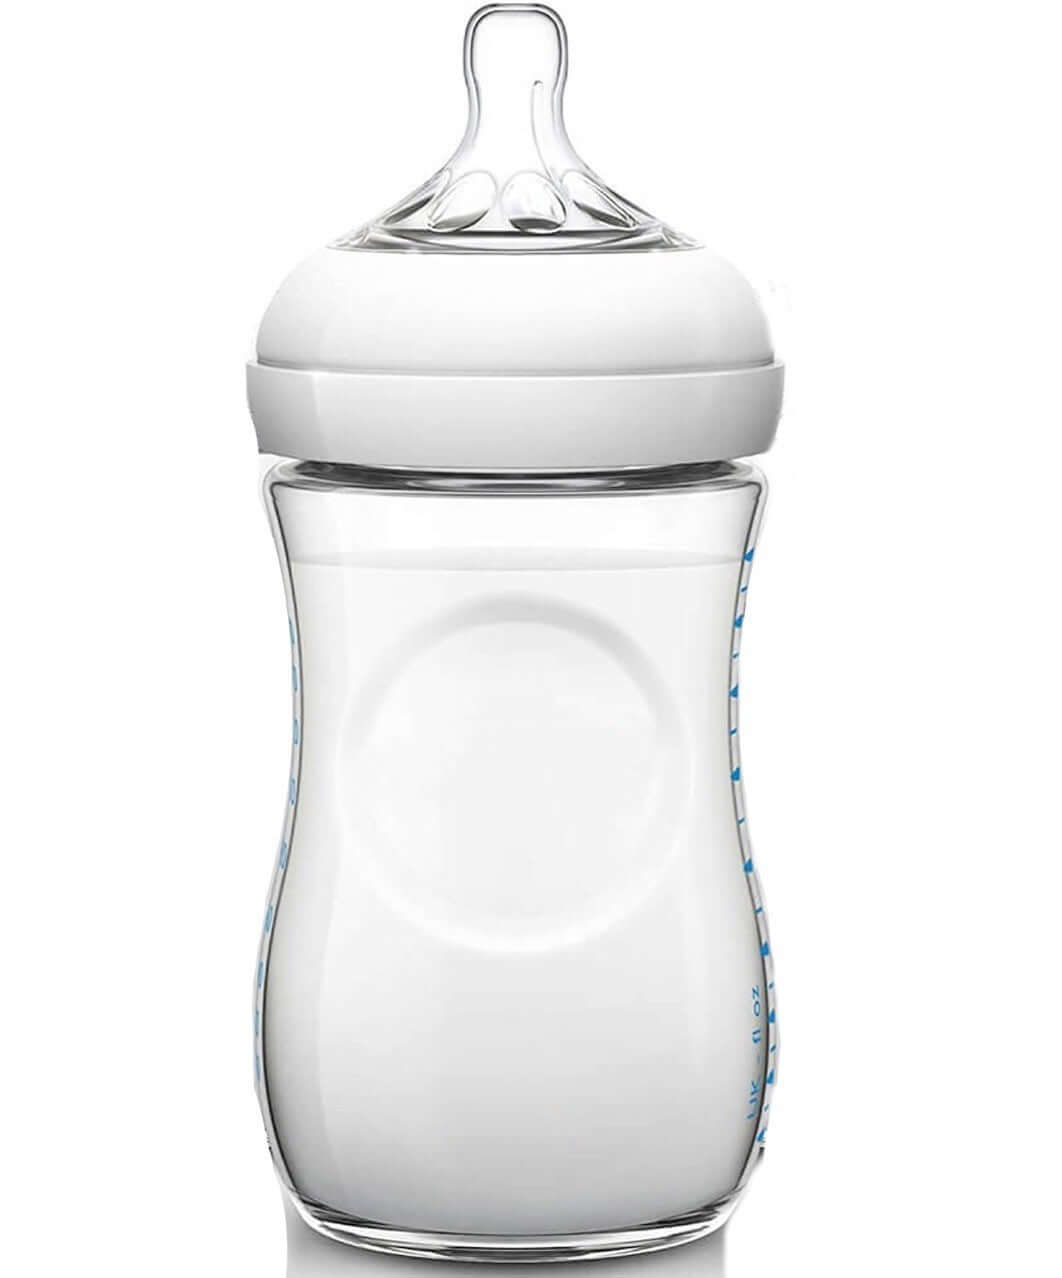 Transparent baby bottle with measurement markings